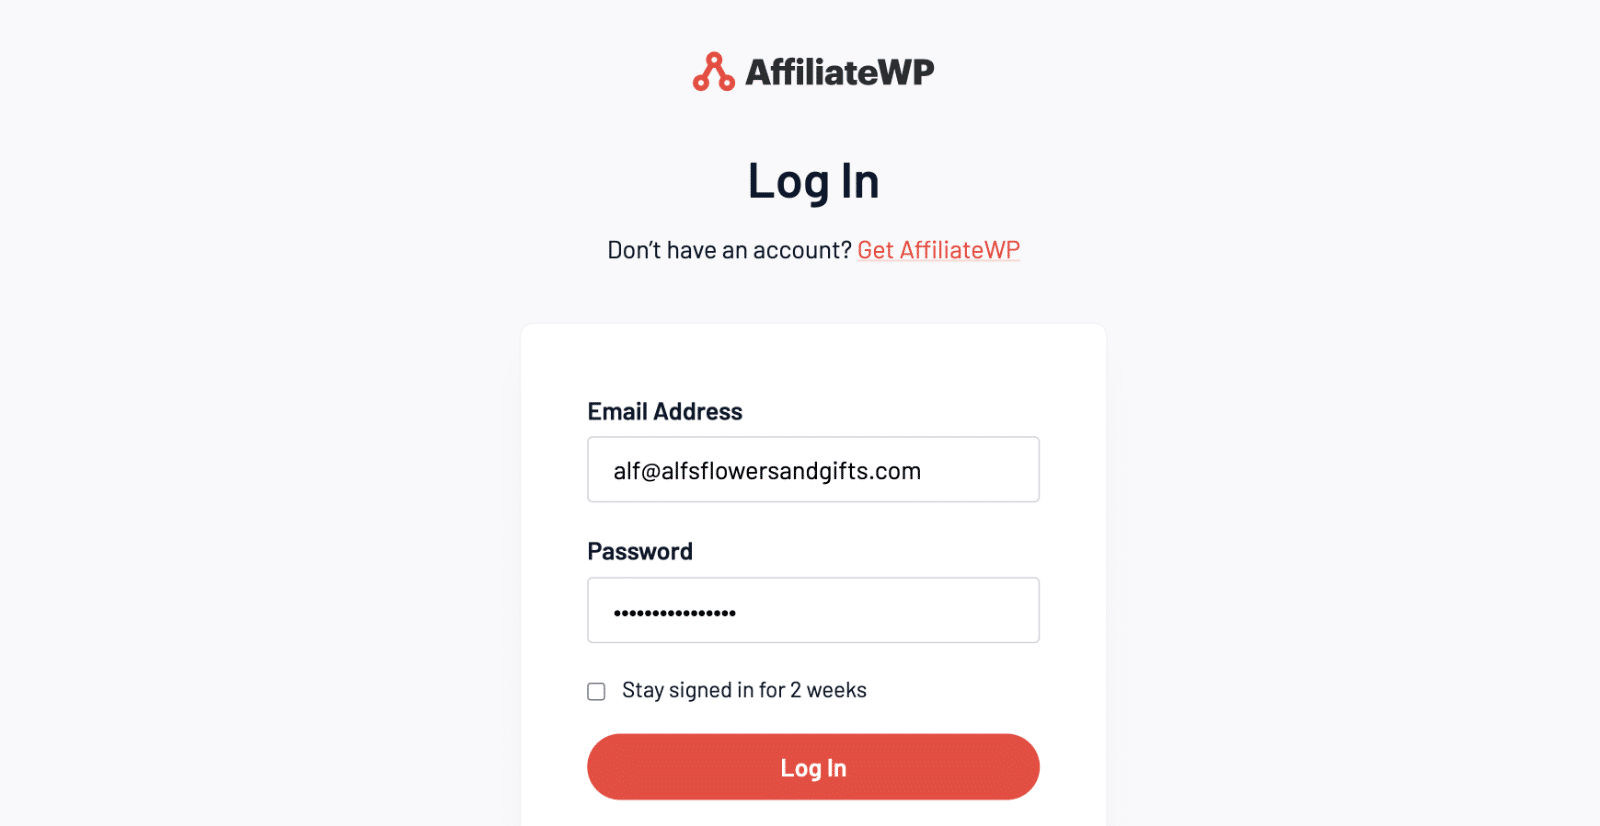 Logging in to your AffiliateWP account